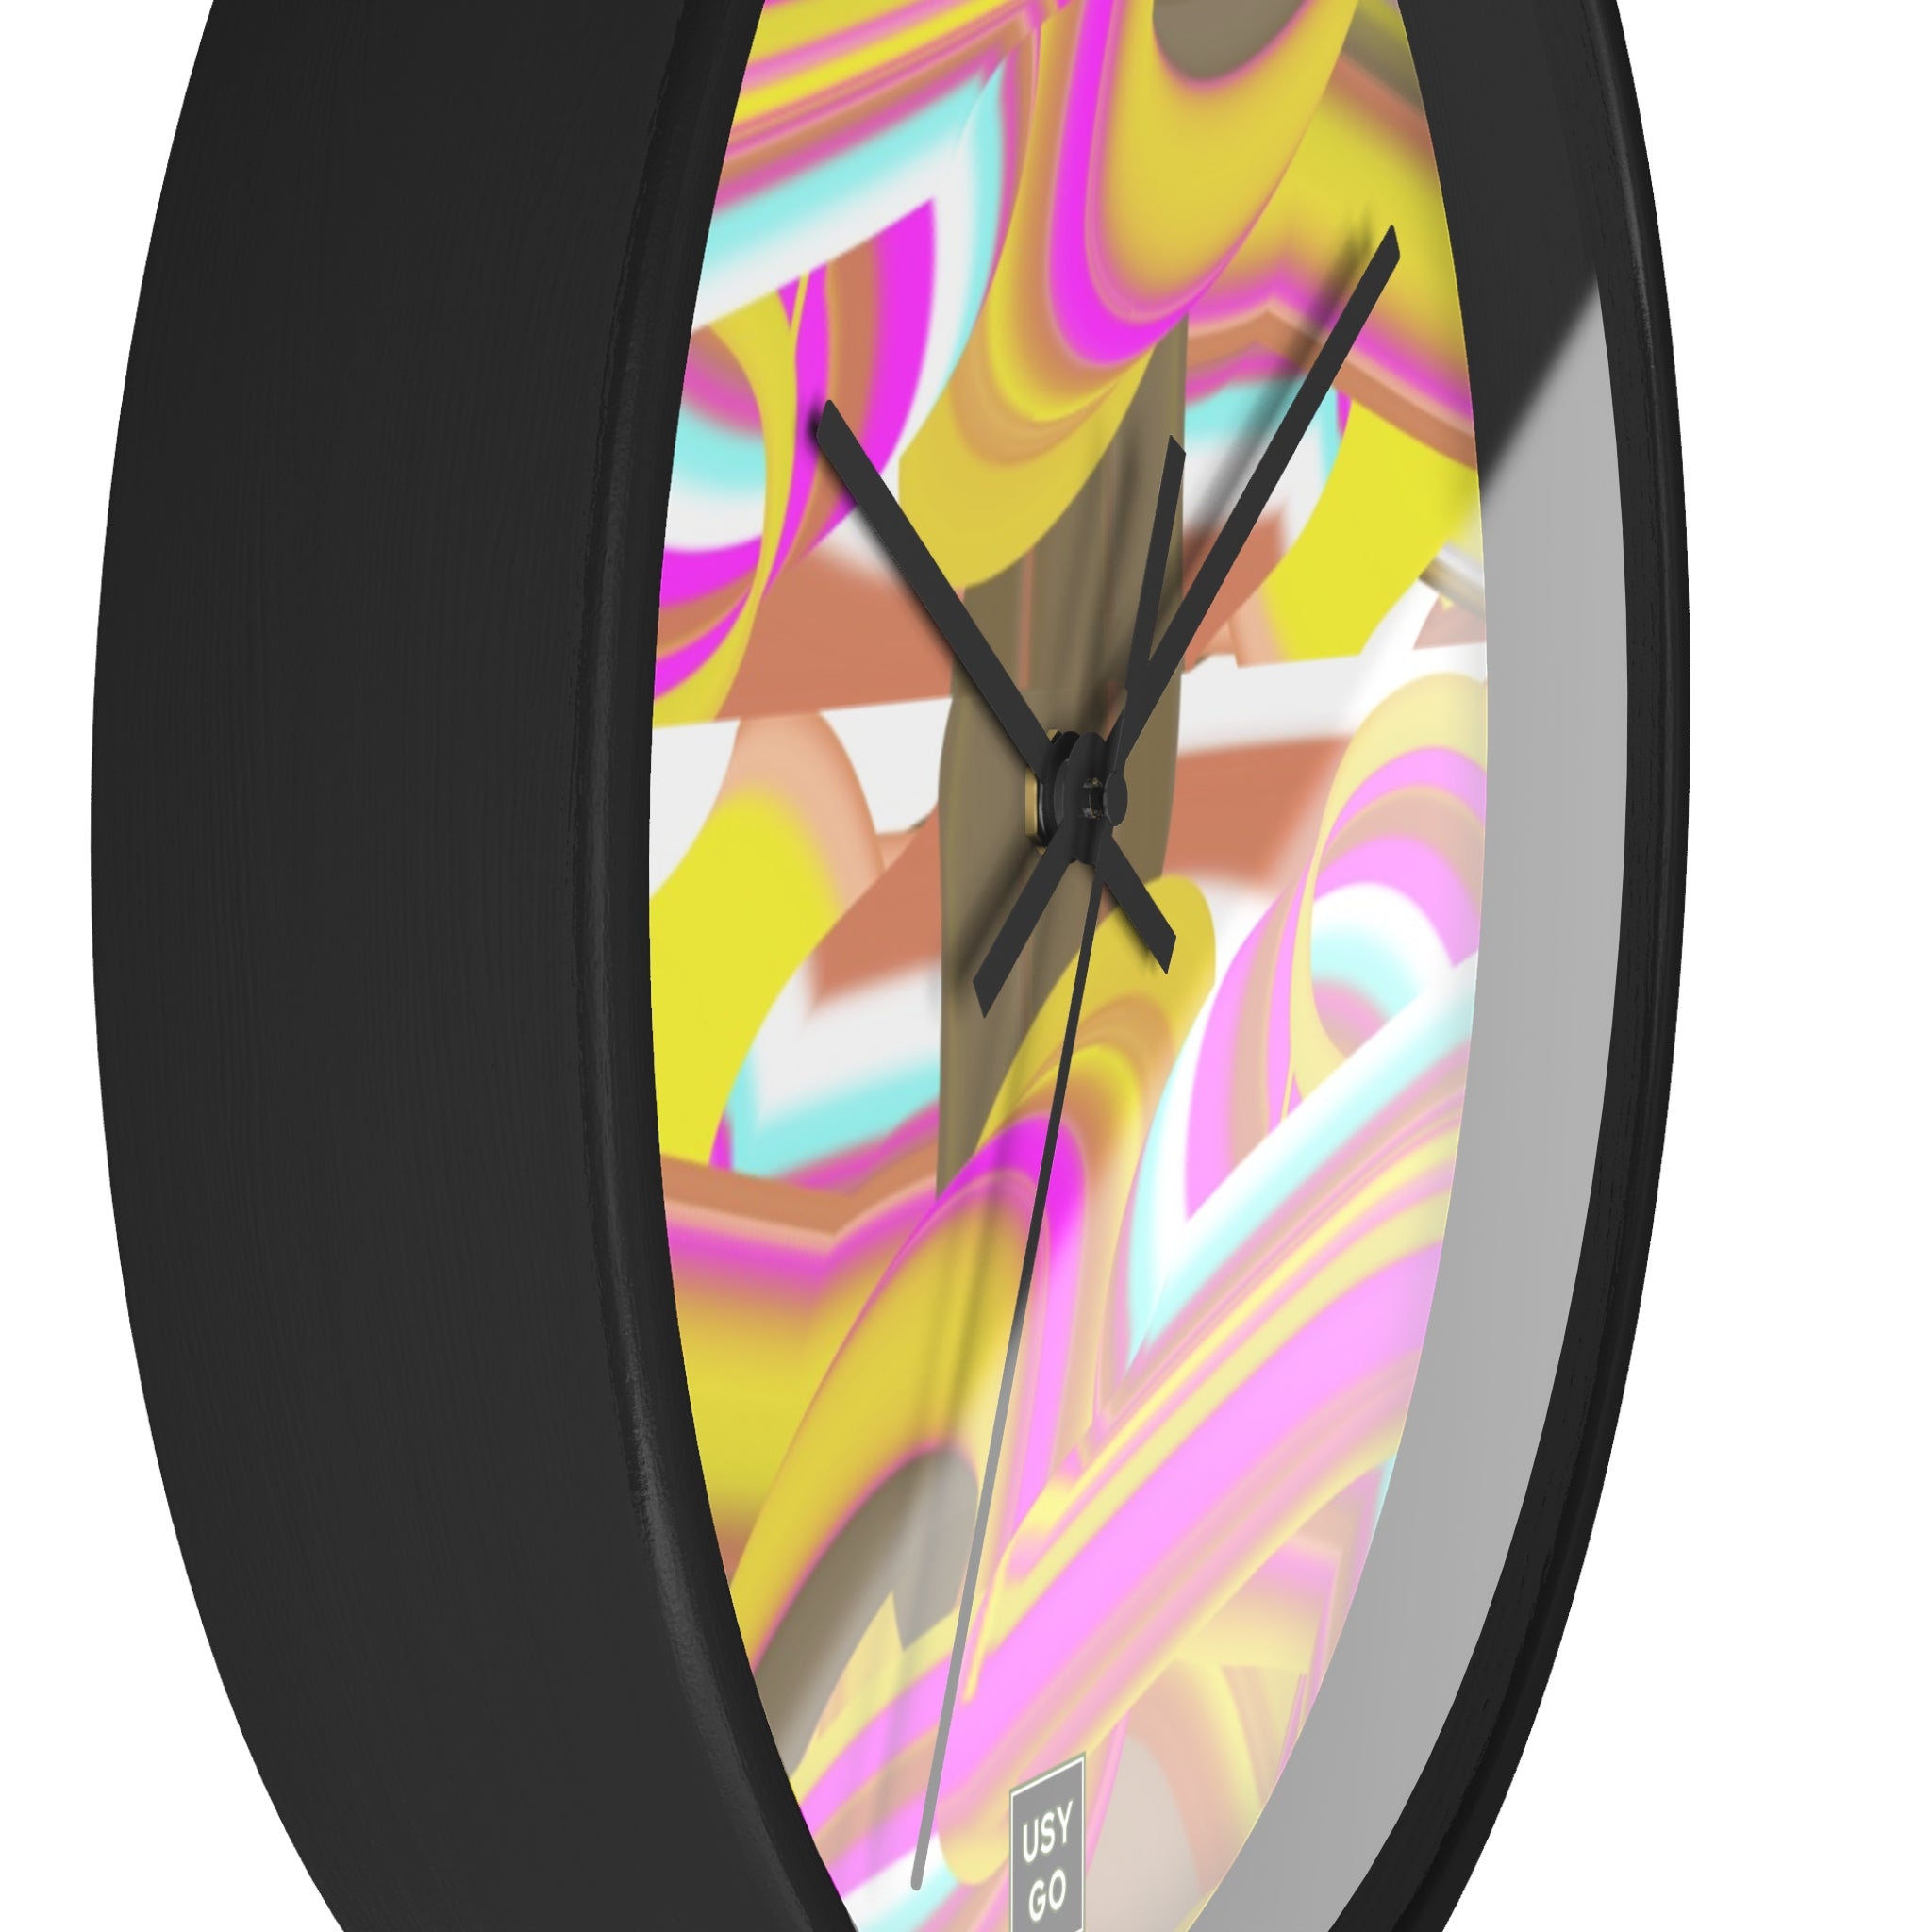 Black Clock 10 inches psychedelic